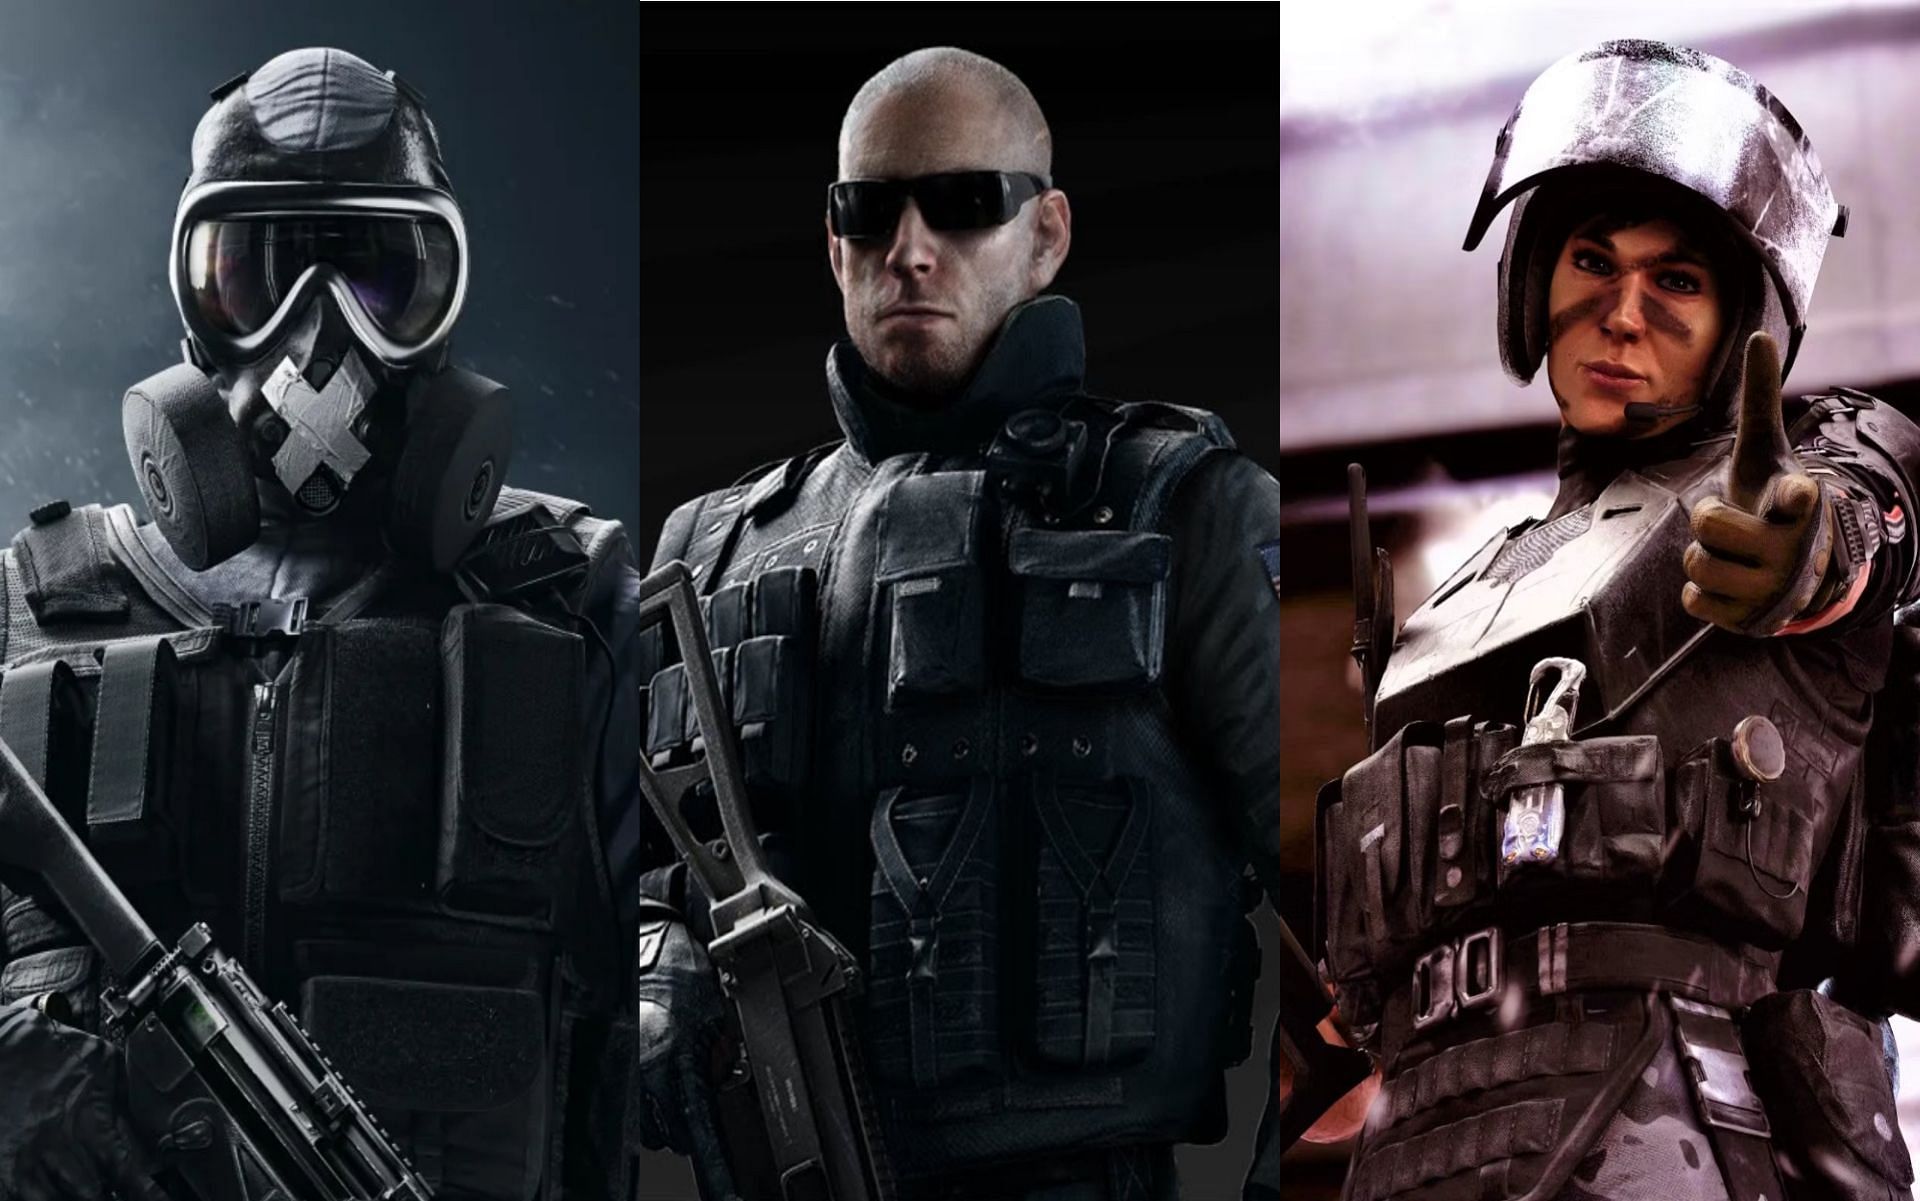 Five best Operators for beginners and five that are great on experienced arms in Rainbow Six Siege (Image via Sportskeeda)